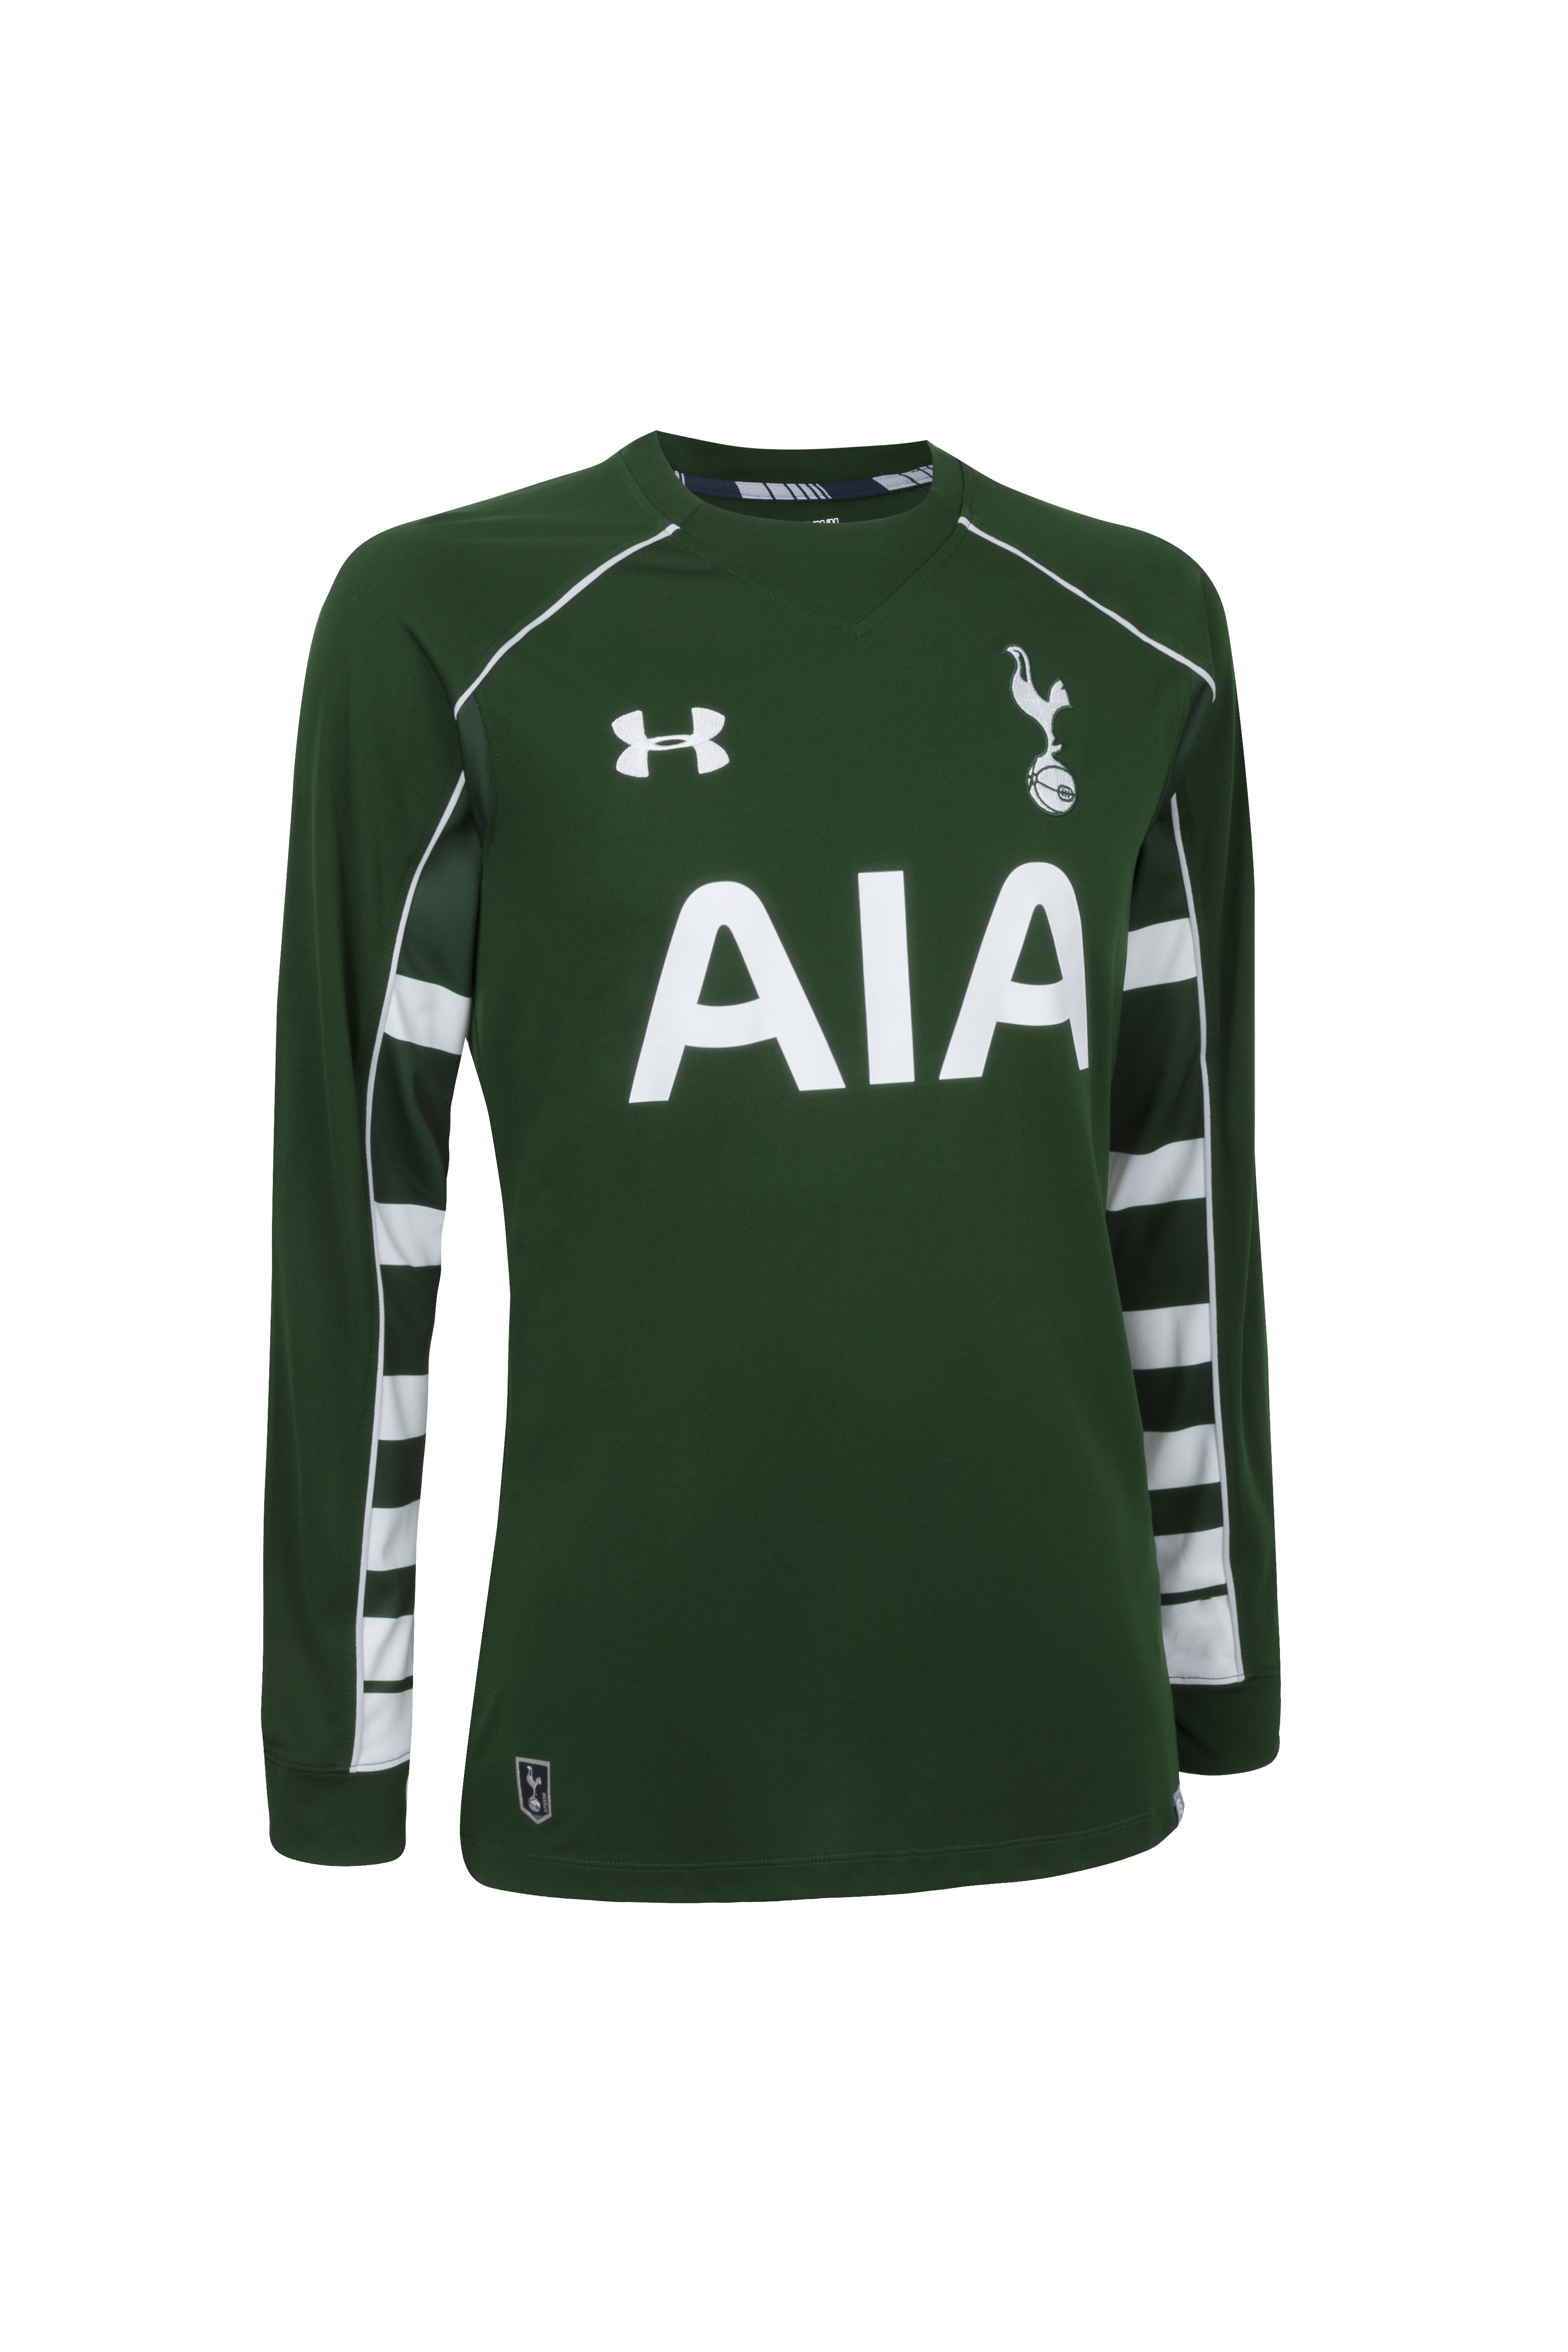 Spurs 15/16 3rd Kit by Under Armour - SoccerBible